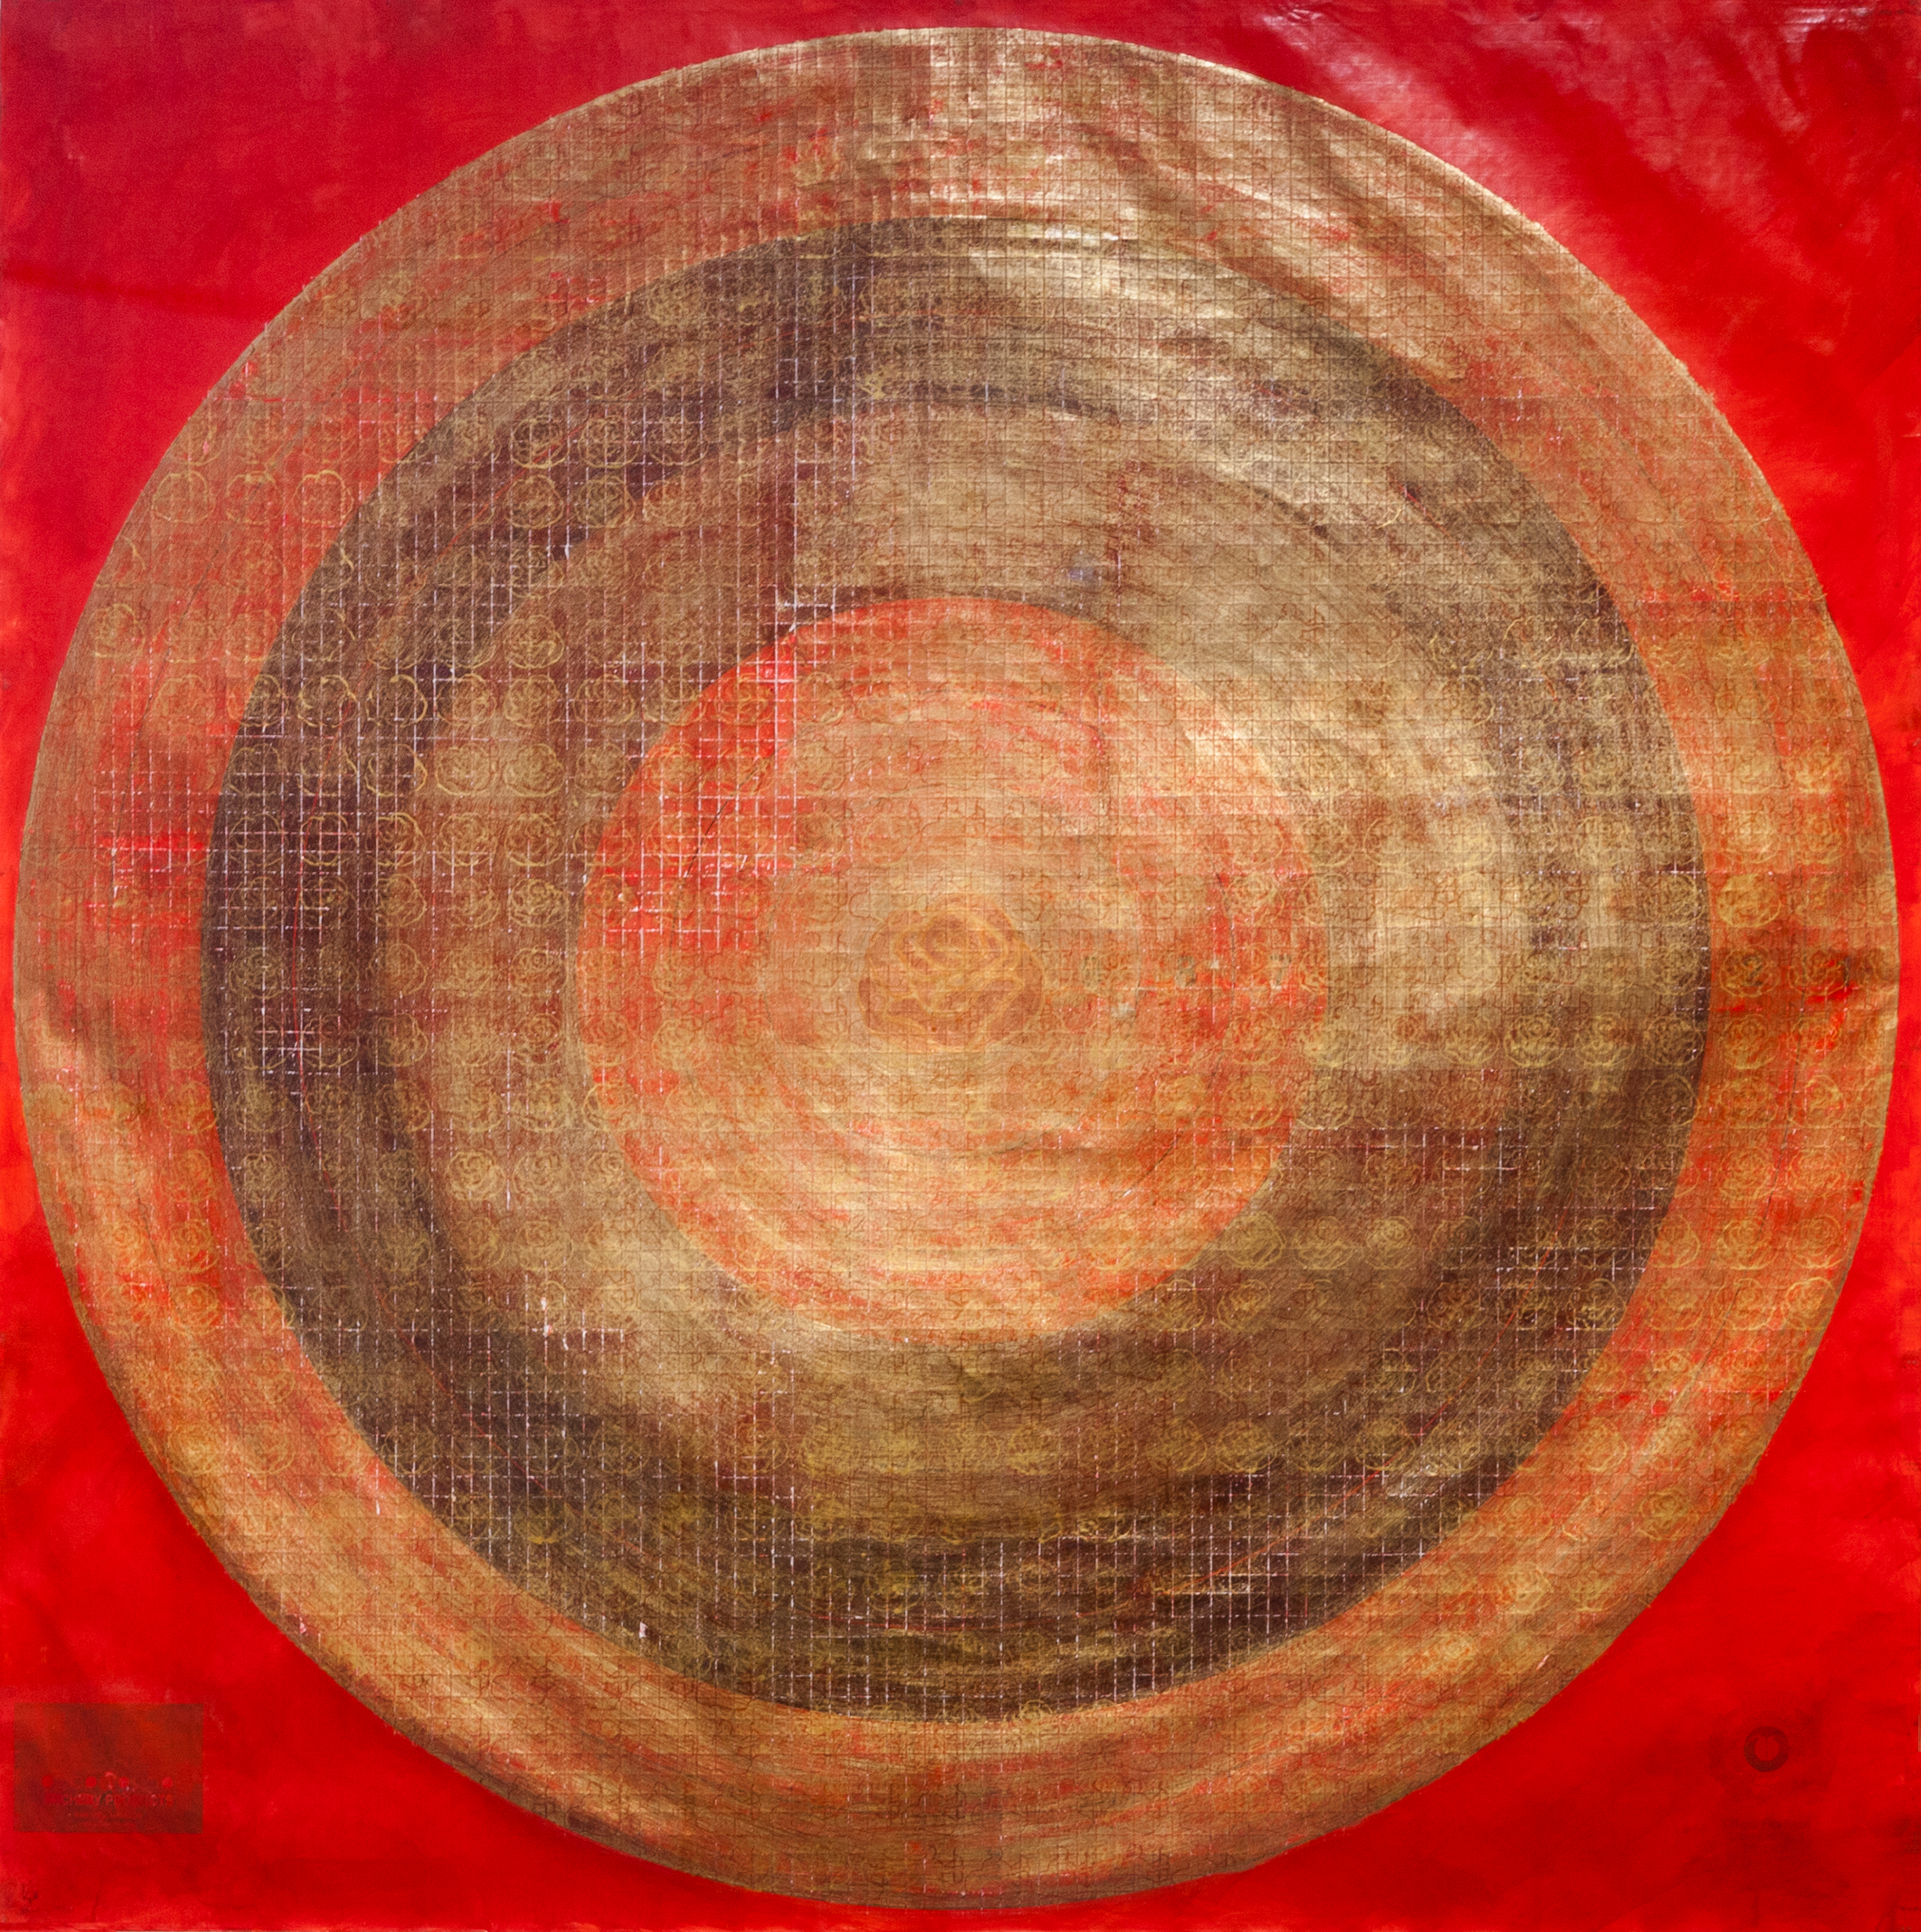   A Balancing Act of Celestial Proportions (Red/Sun) , 2013,&nbsp;Acrylic ink,&nbsp;graphite, gold leaf, woodblock stamps, needle tool, blade &amp; sandpaper on found target paper, 140 x 140 cm 